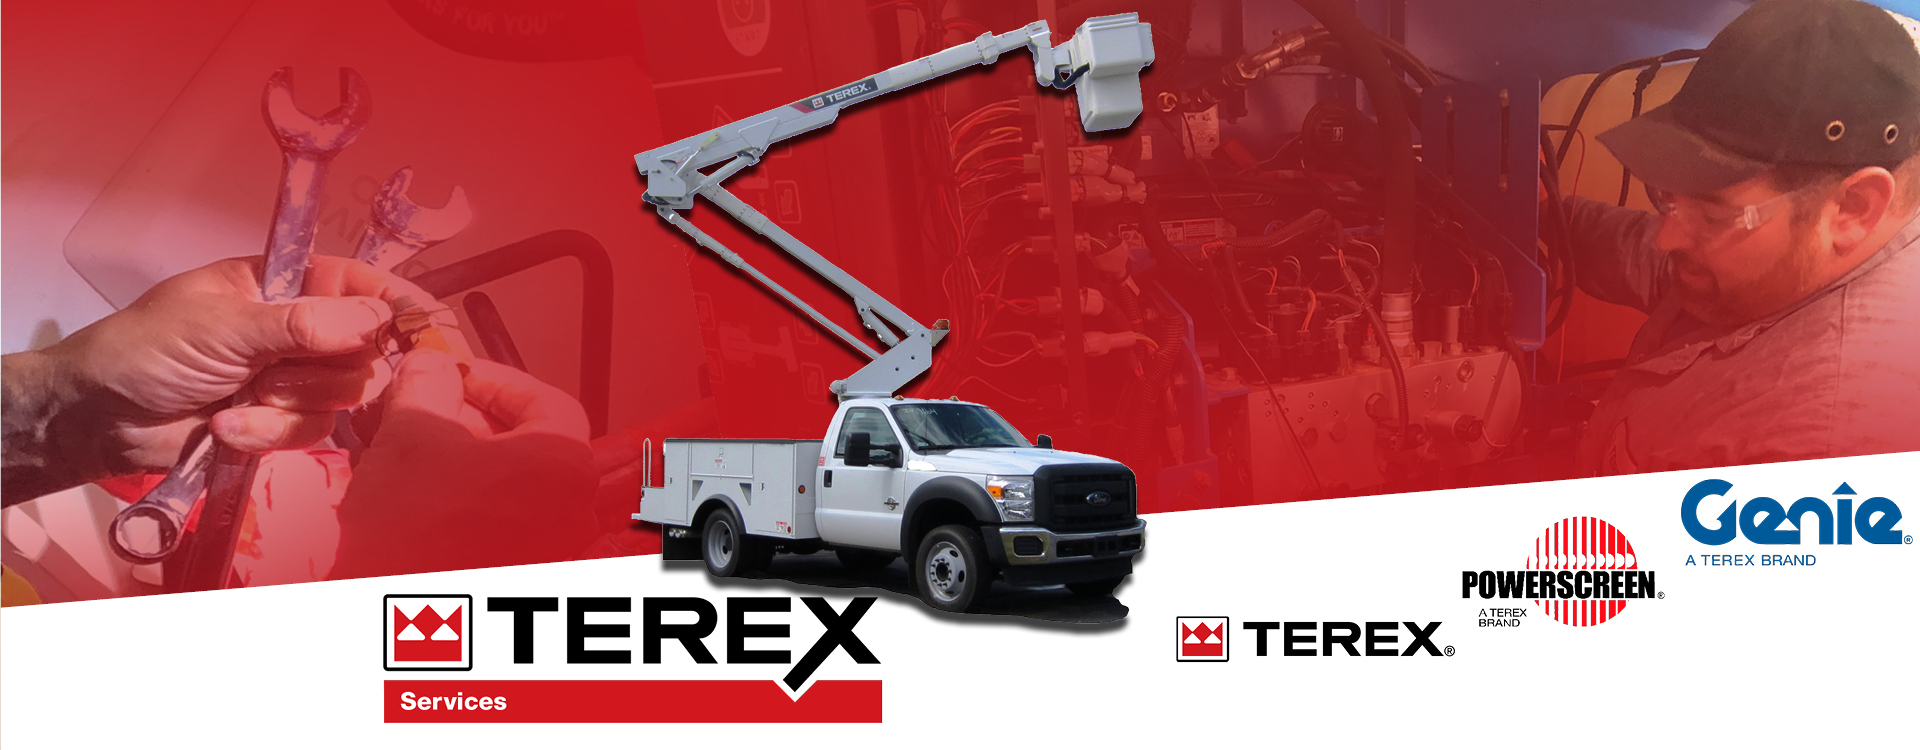 Terex Services | Full Service, Any Brand